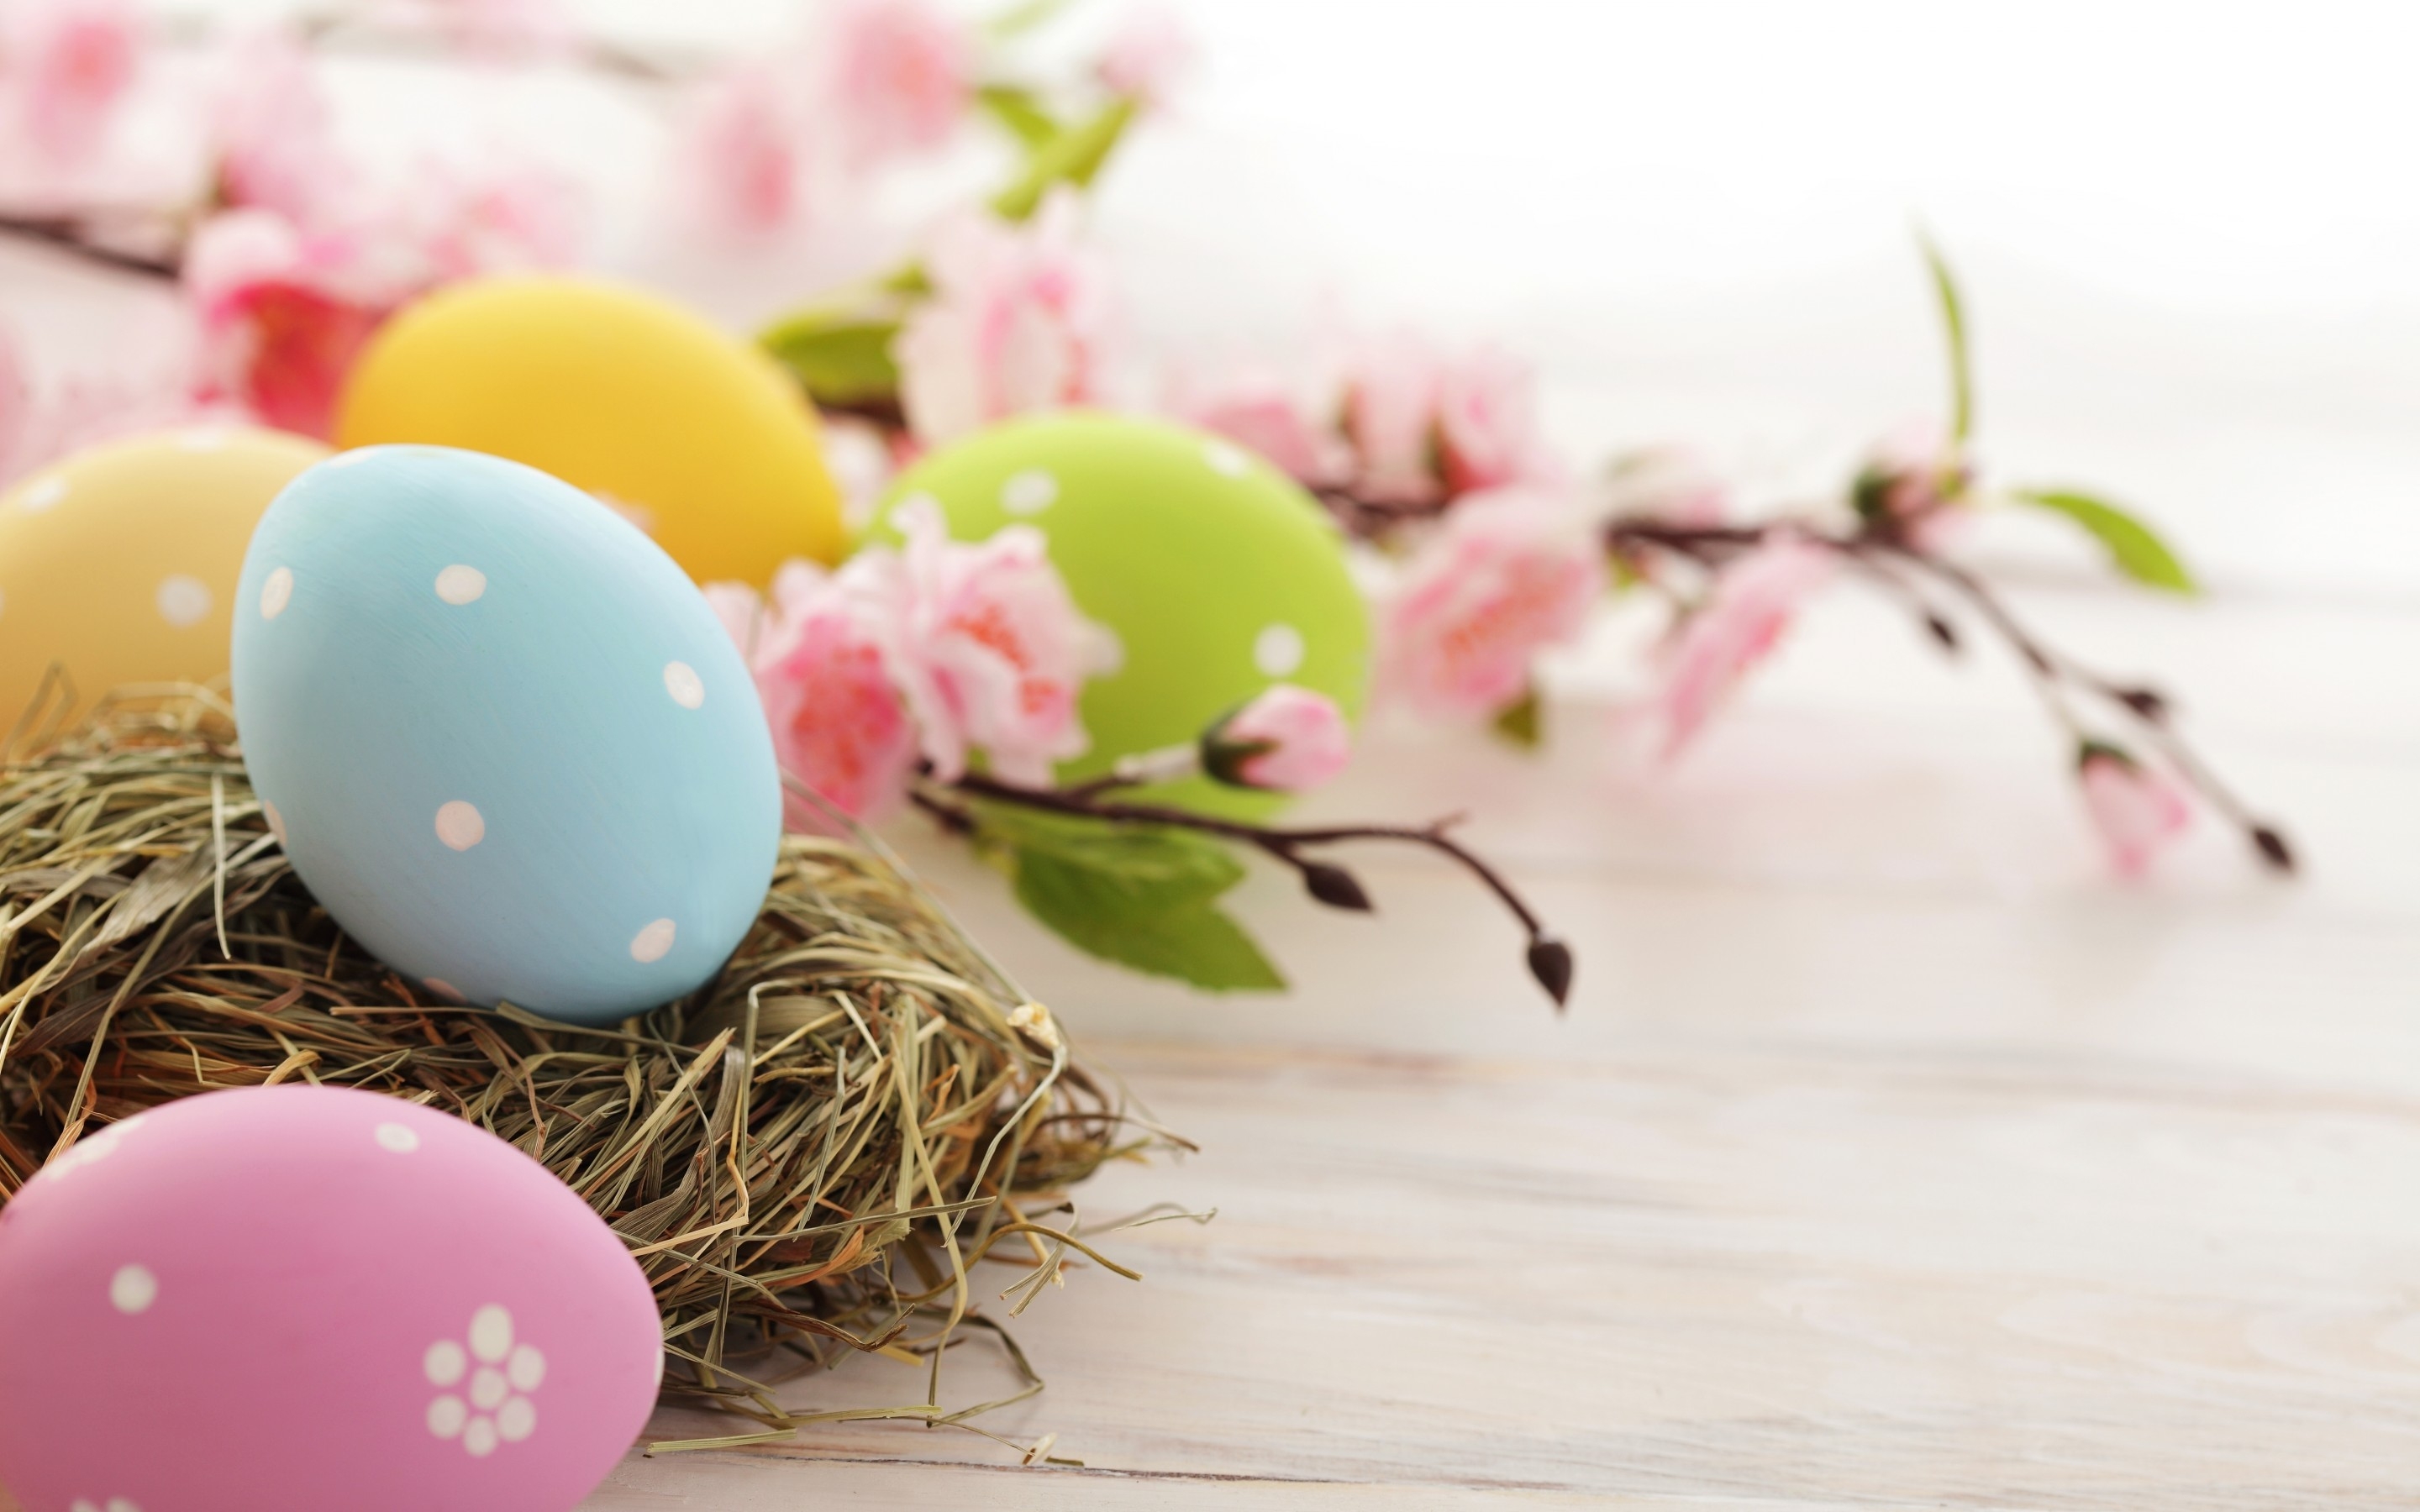 Easter Time Eggs for 2880 x 1800 Retina Display resolution